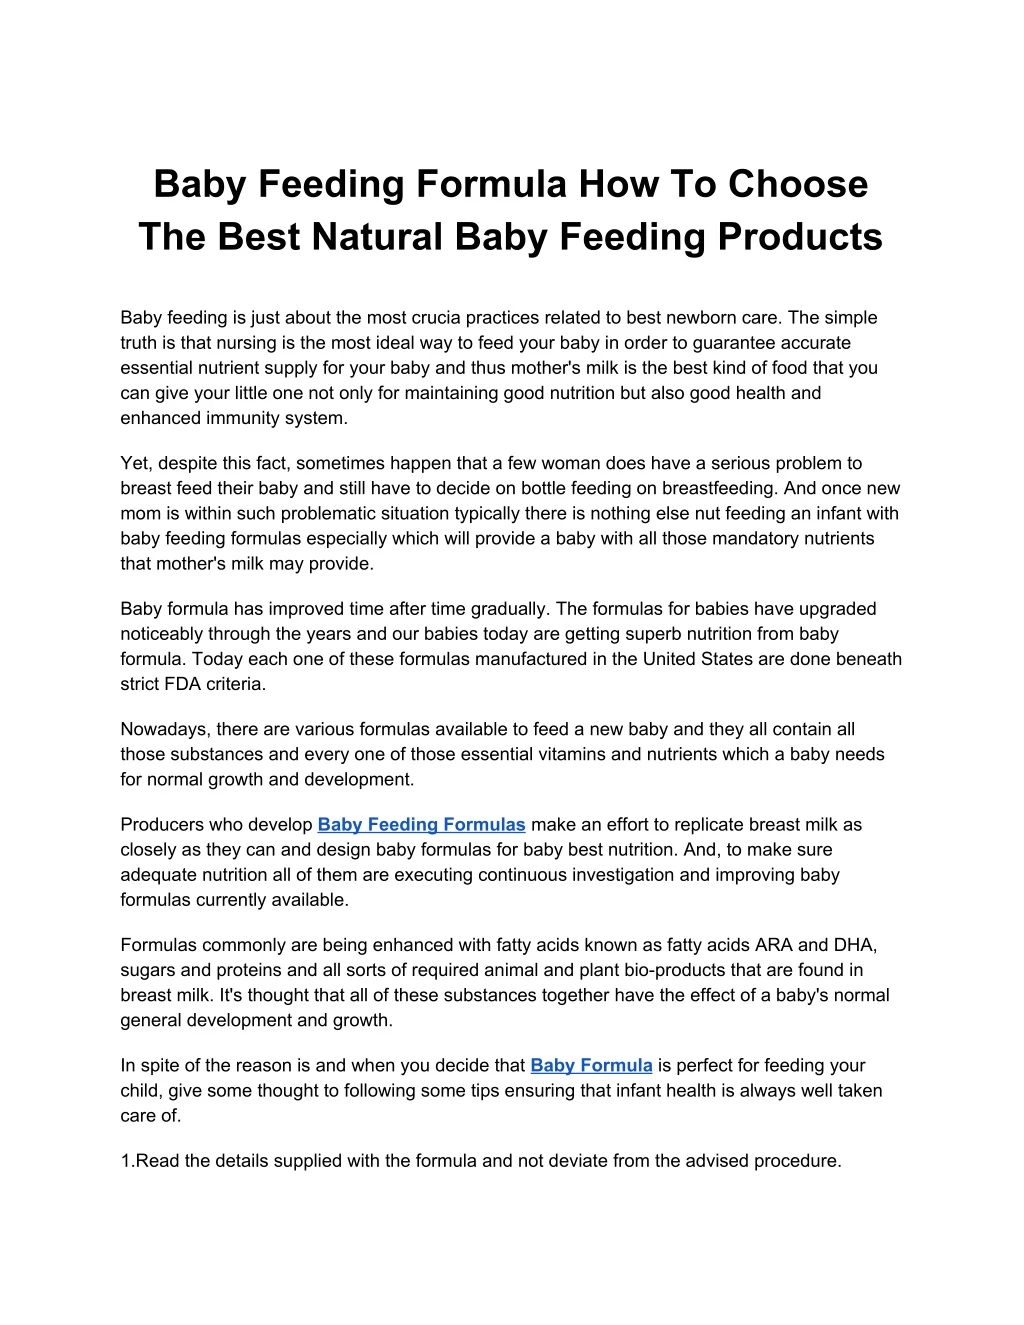 baby feeding formula how to choose the best